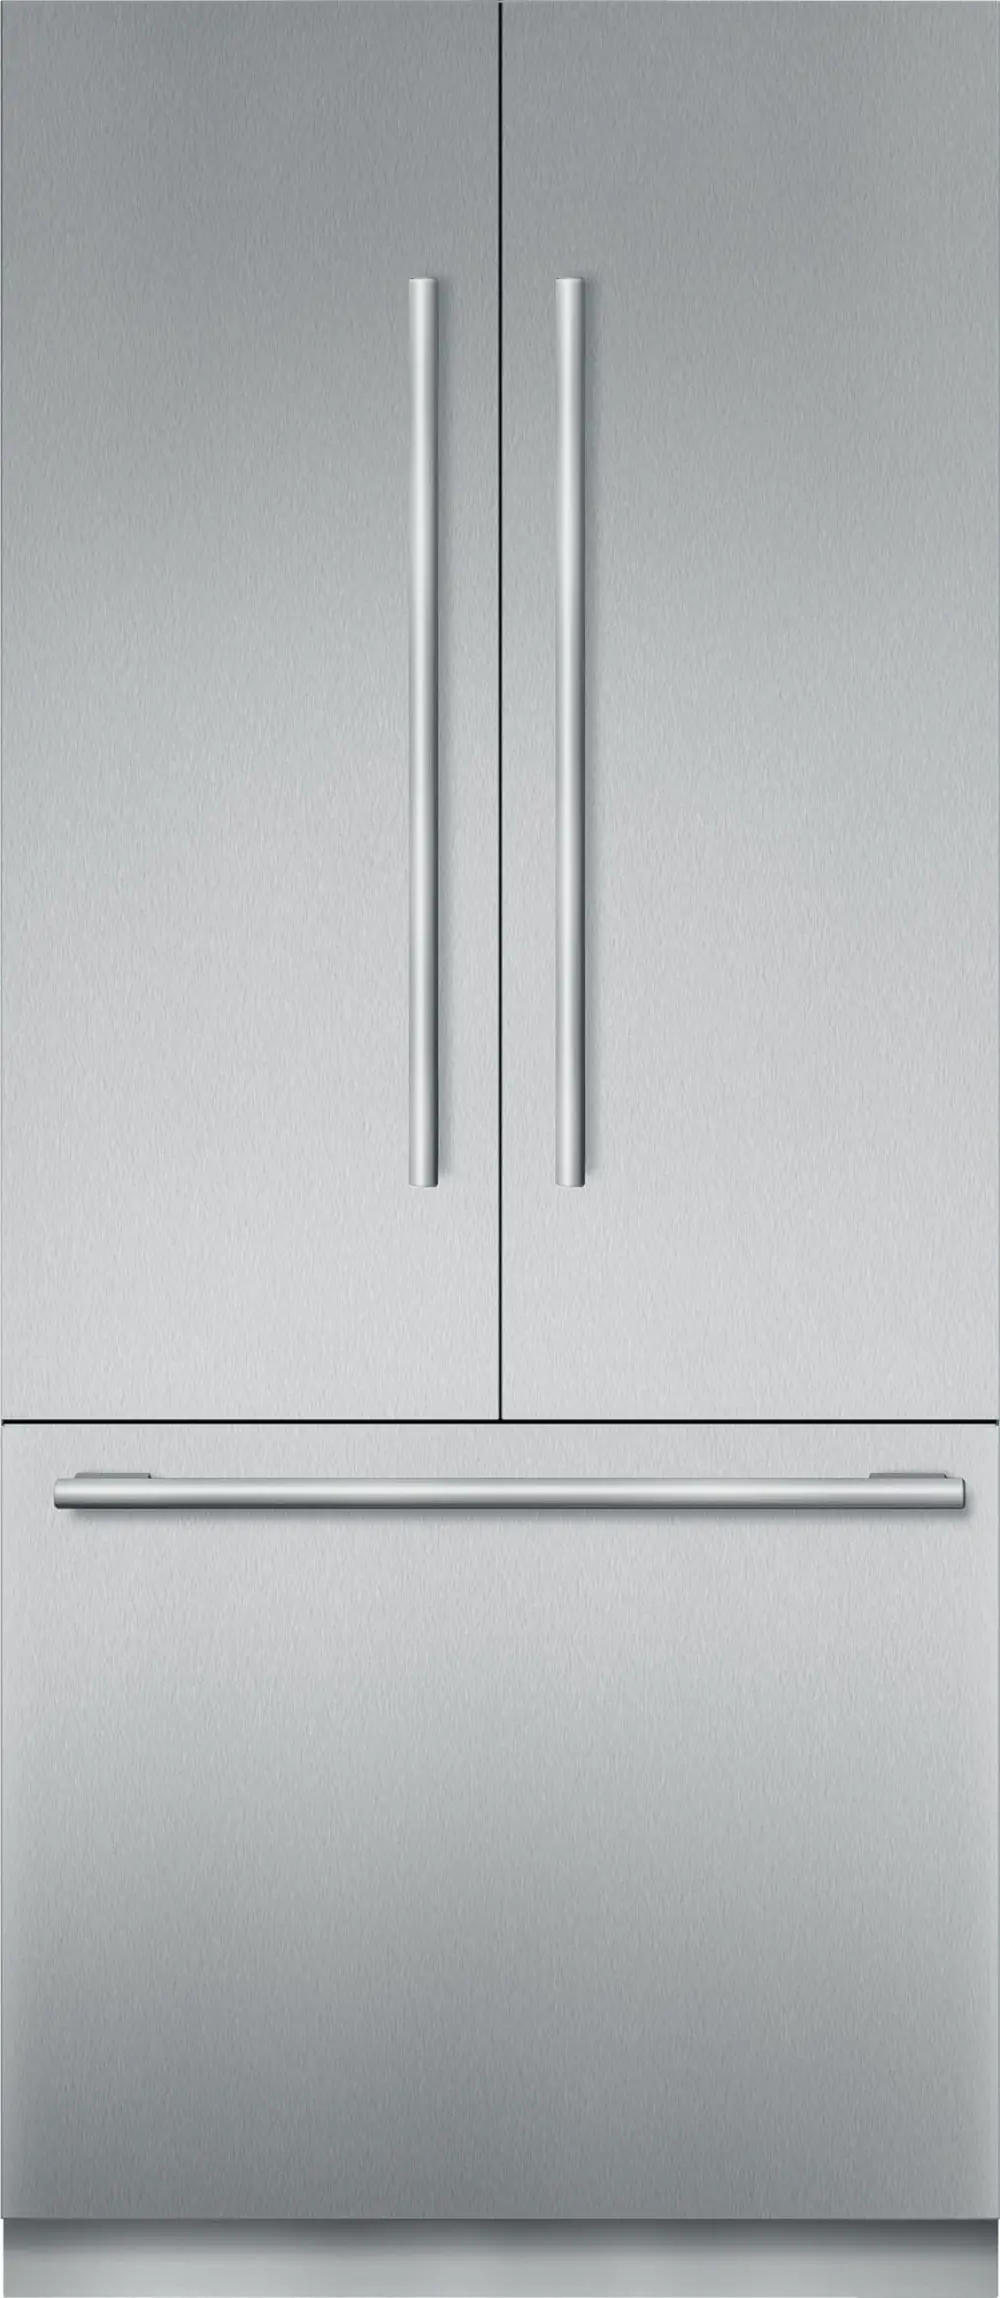 T36BT915NS Thermador Masterpiece 36 Inch French Door Refrigerator - Stainless Steel, 19.4 cu. ft.-1